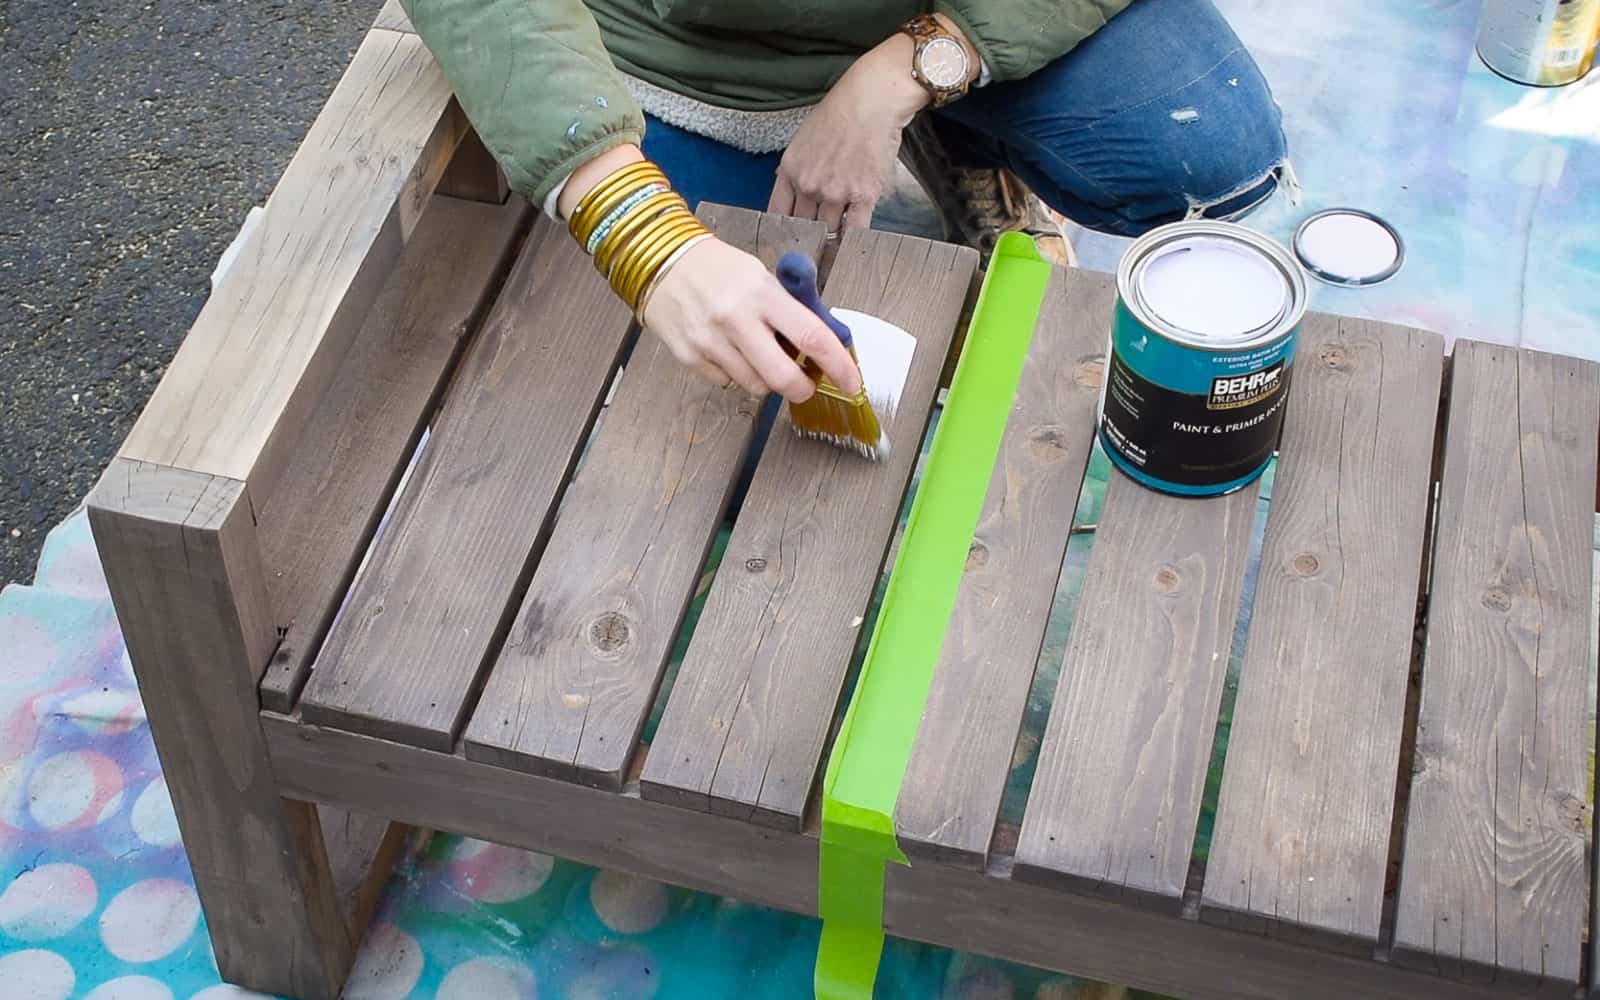 taping off benches and painting